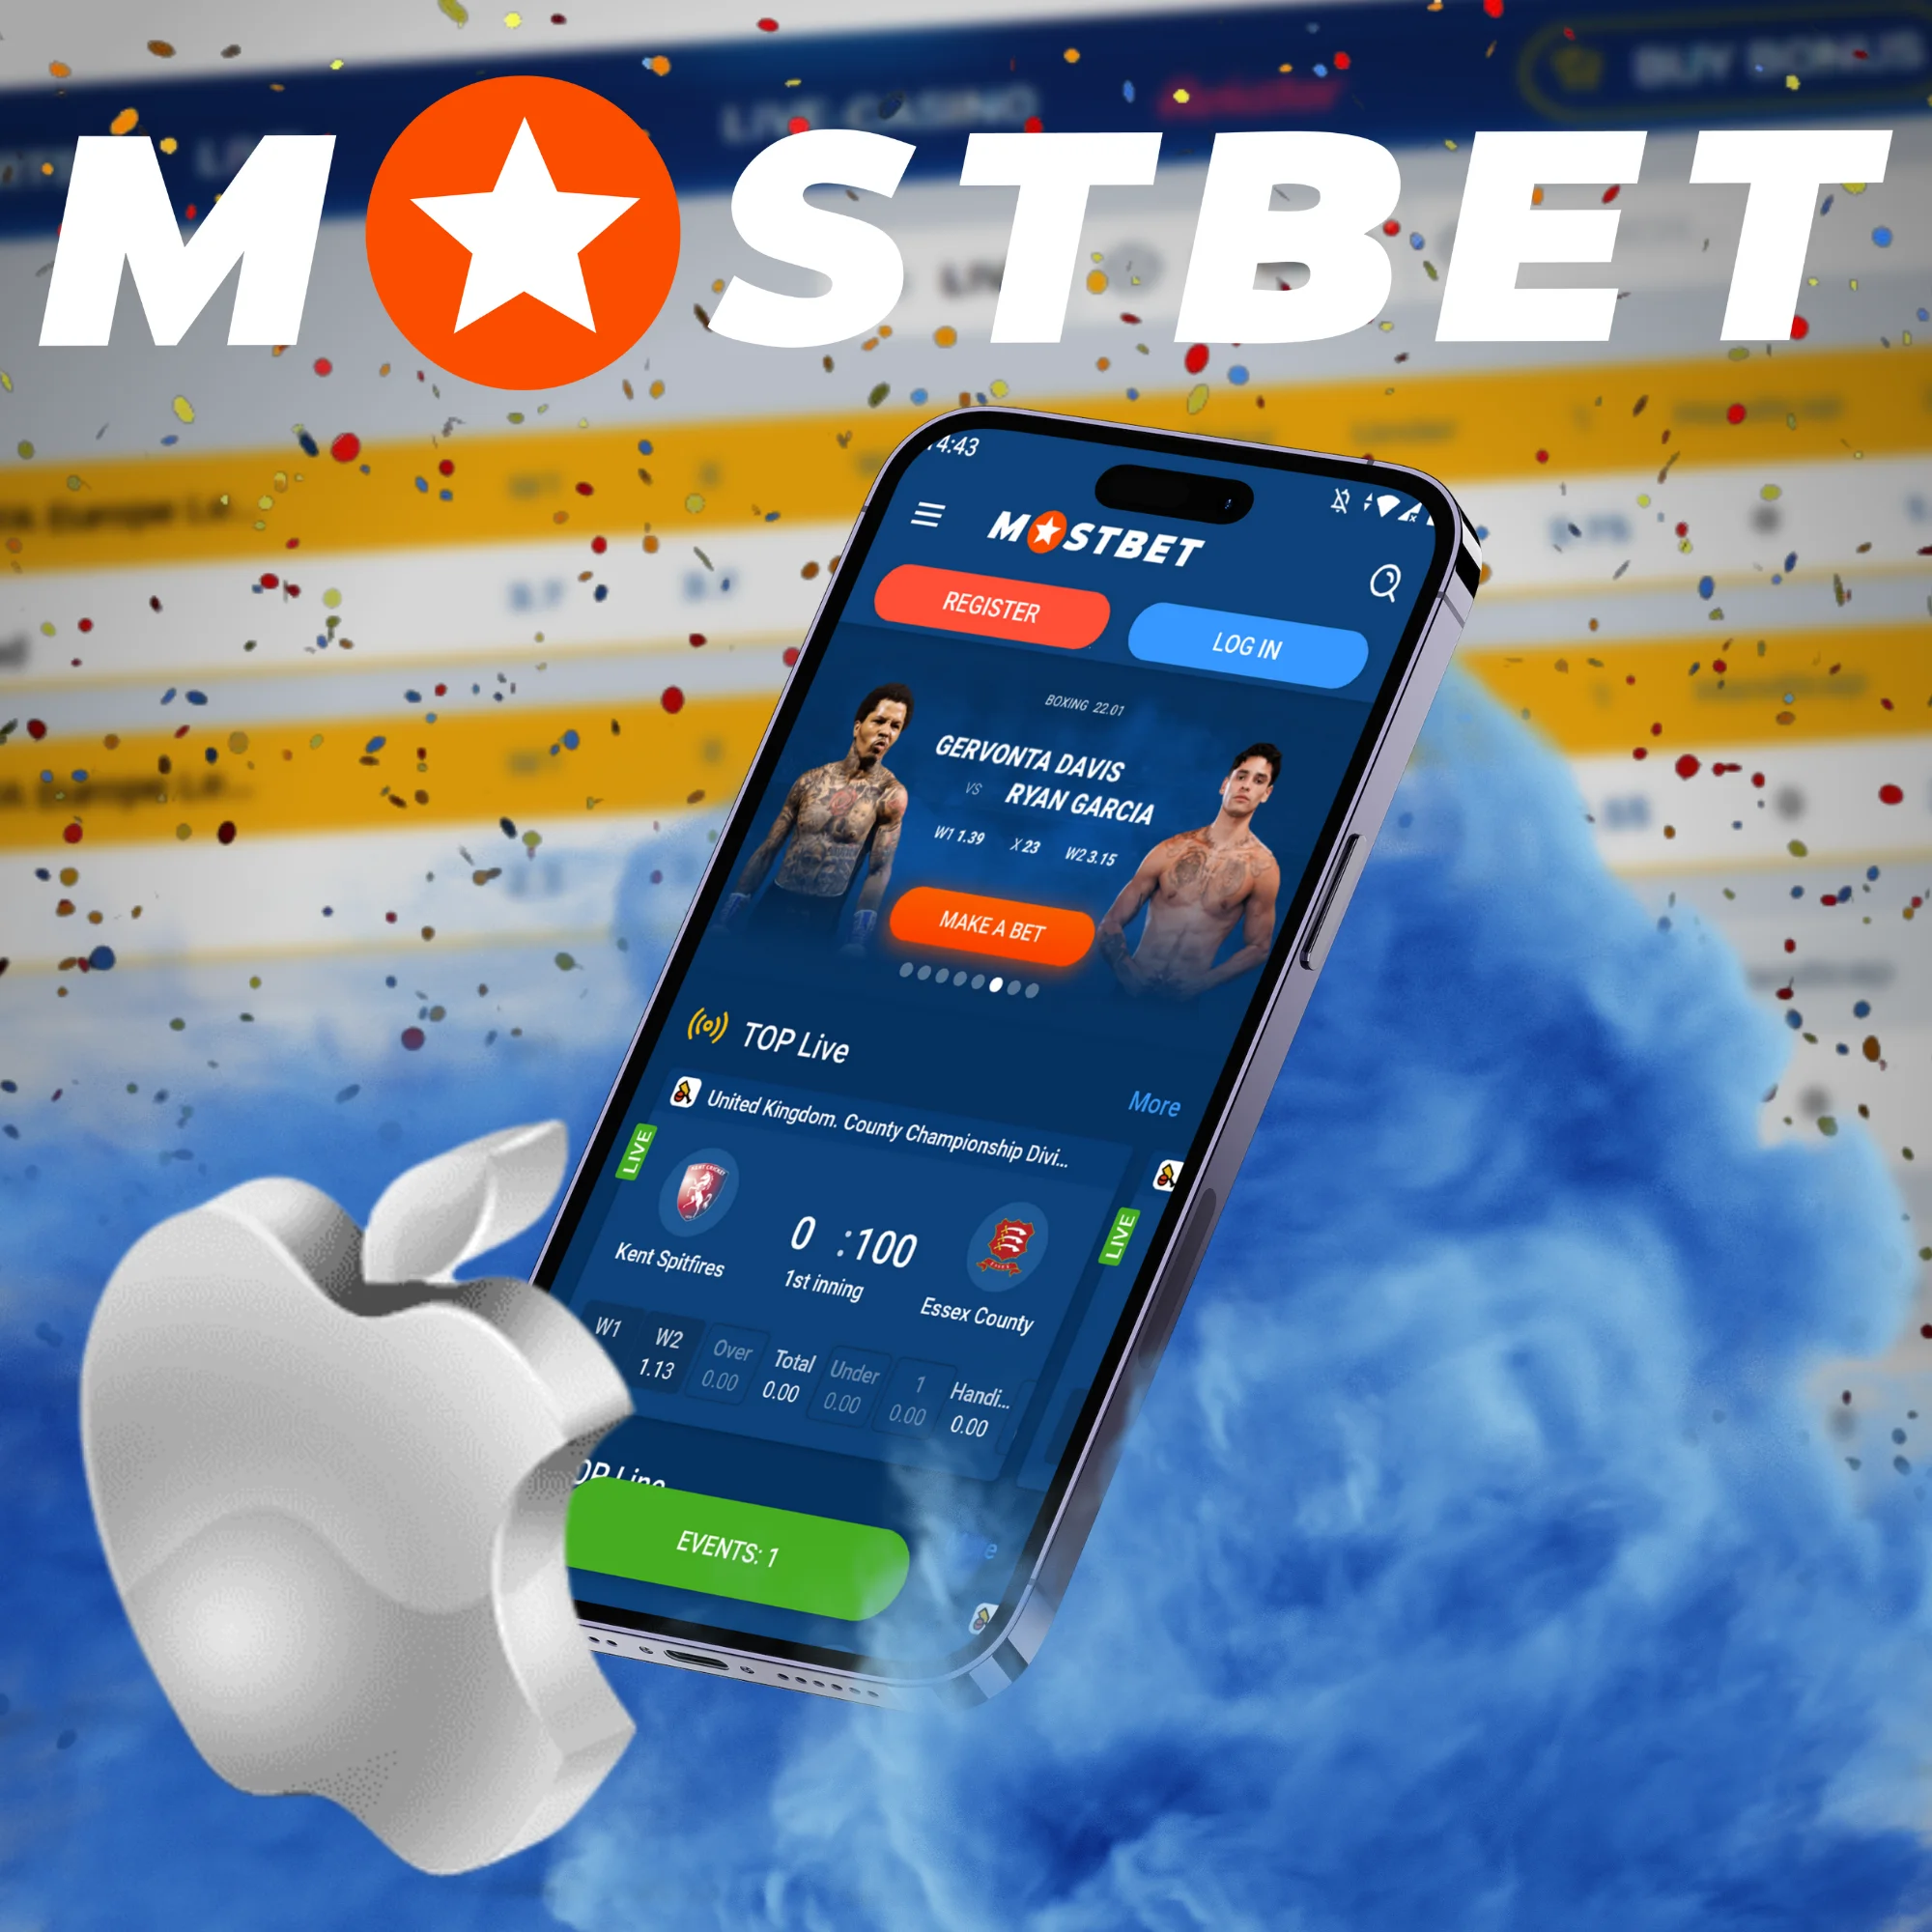 Mostbet Mobile App on iOS